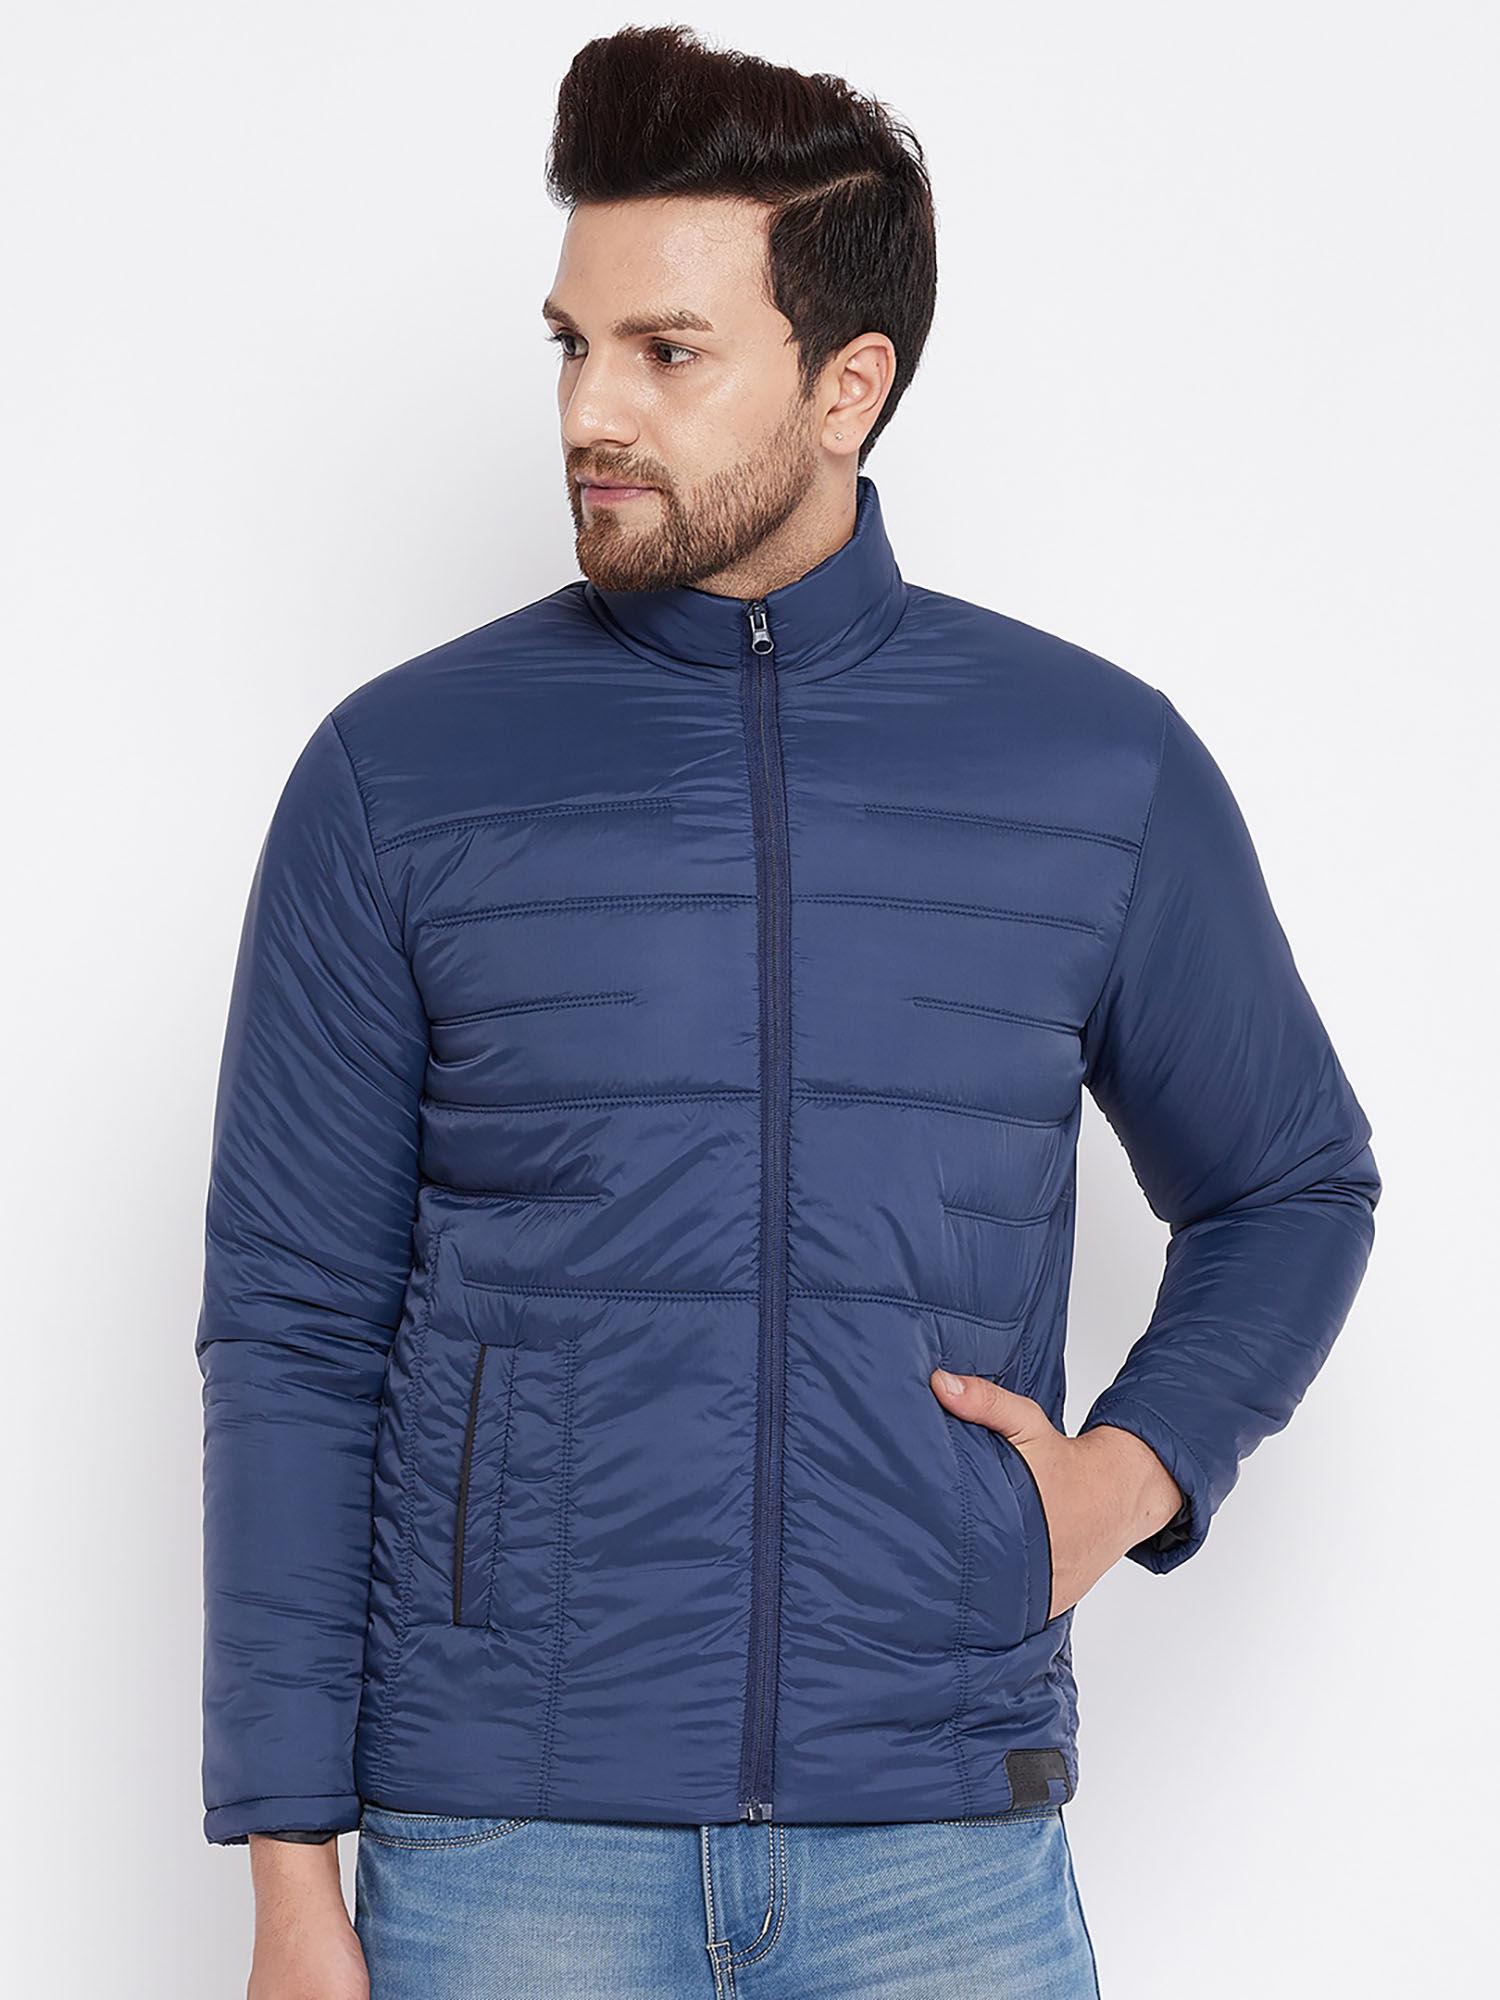 blue solid full sleeve jackets